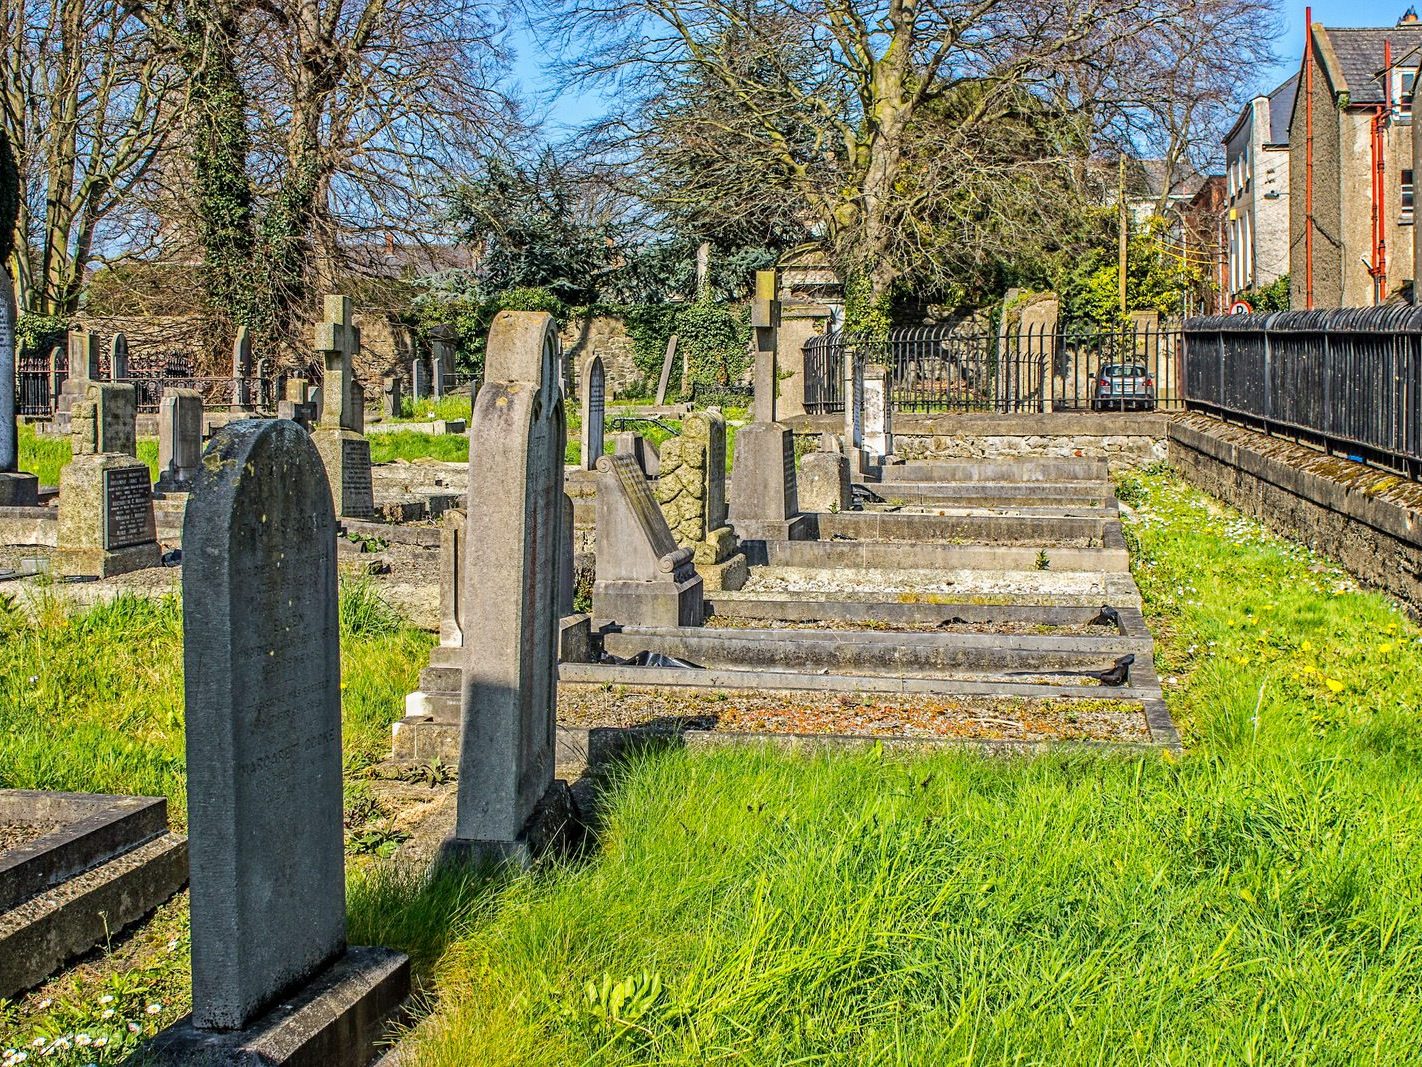 SOME OLD IMAGES OF ST PETERS CHURCHYARD IN DROGHEDA [PHOTOGRAPHED 20212]-224211-1